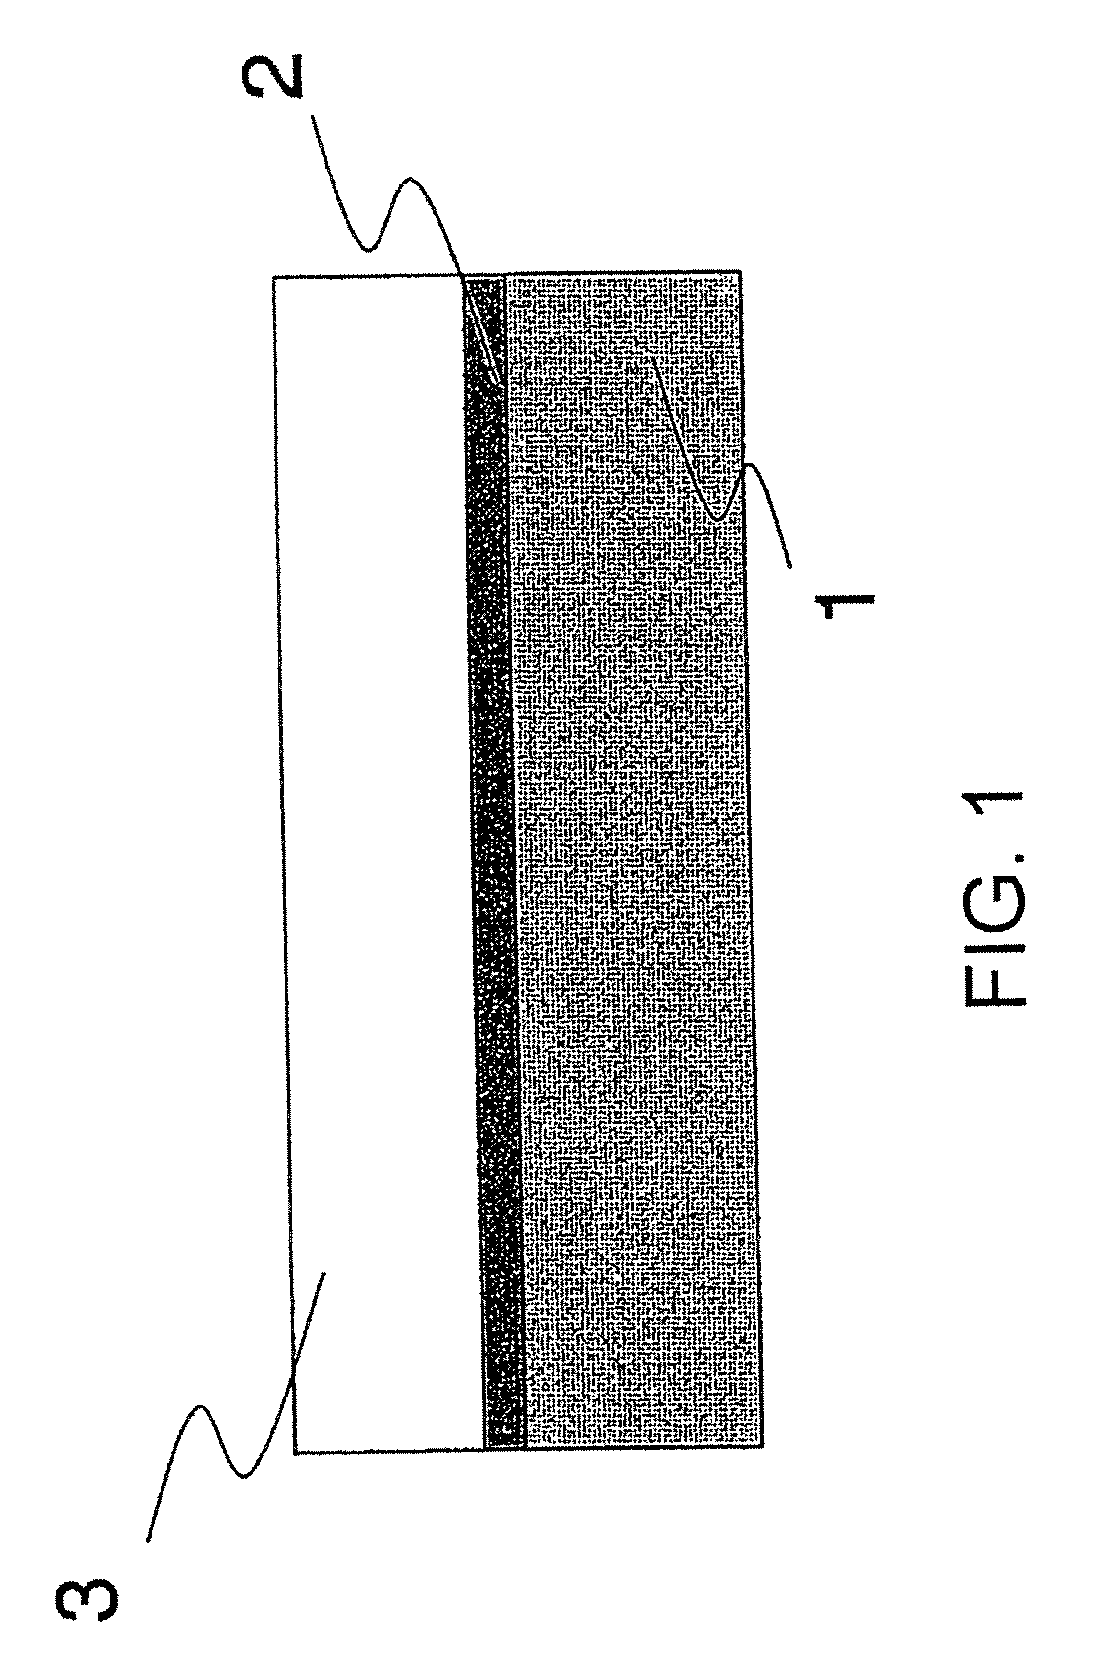 Protective Film Structure of Metal Member, Metal Component Employing Protective Film Structure, and Equipment for Producing Semiconductor or Flat-Plate Display Employing Protective Film Structure